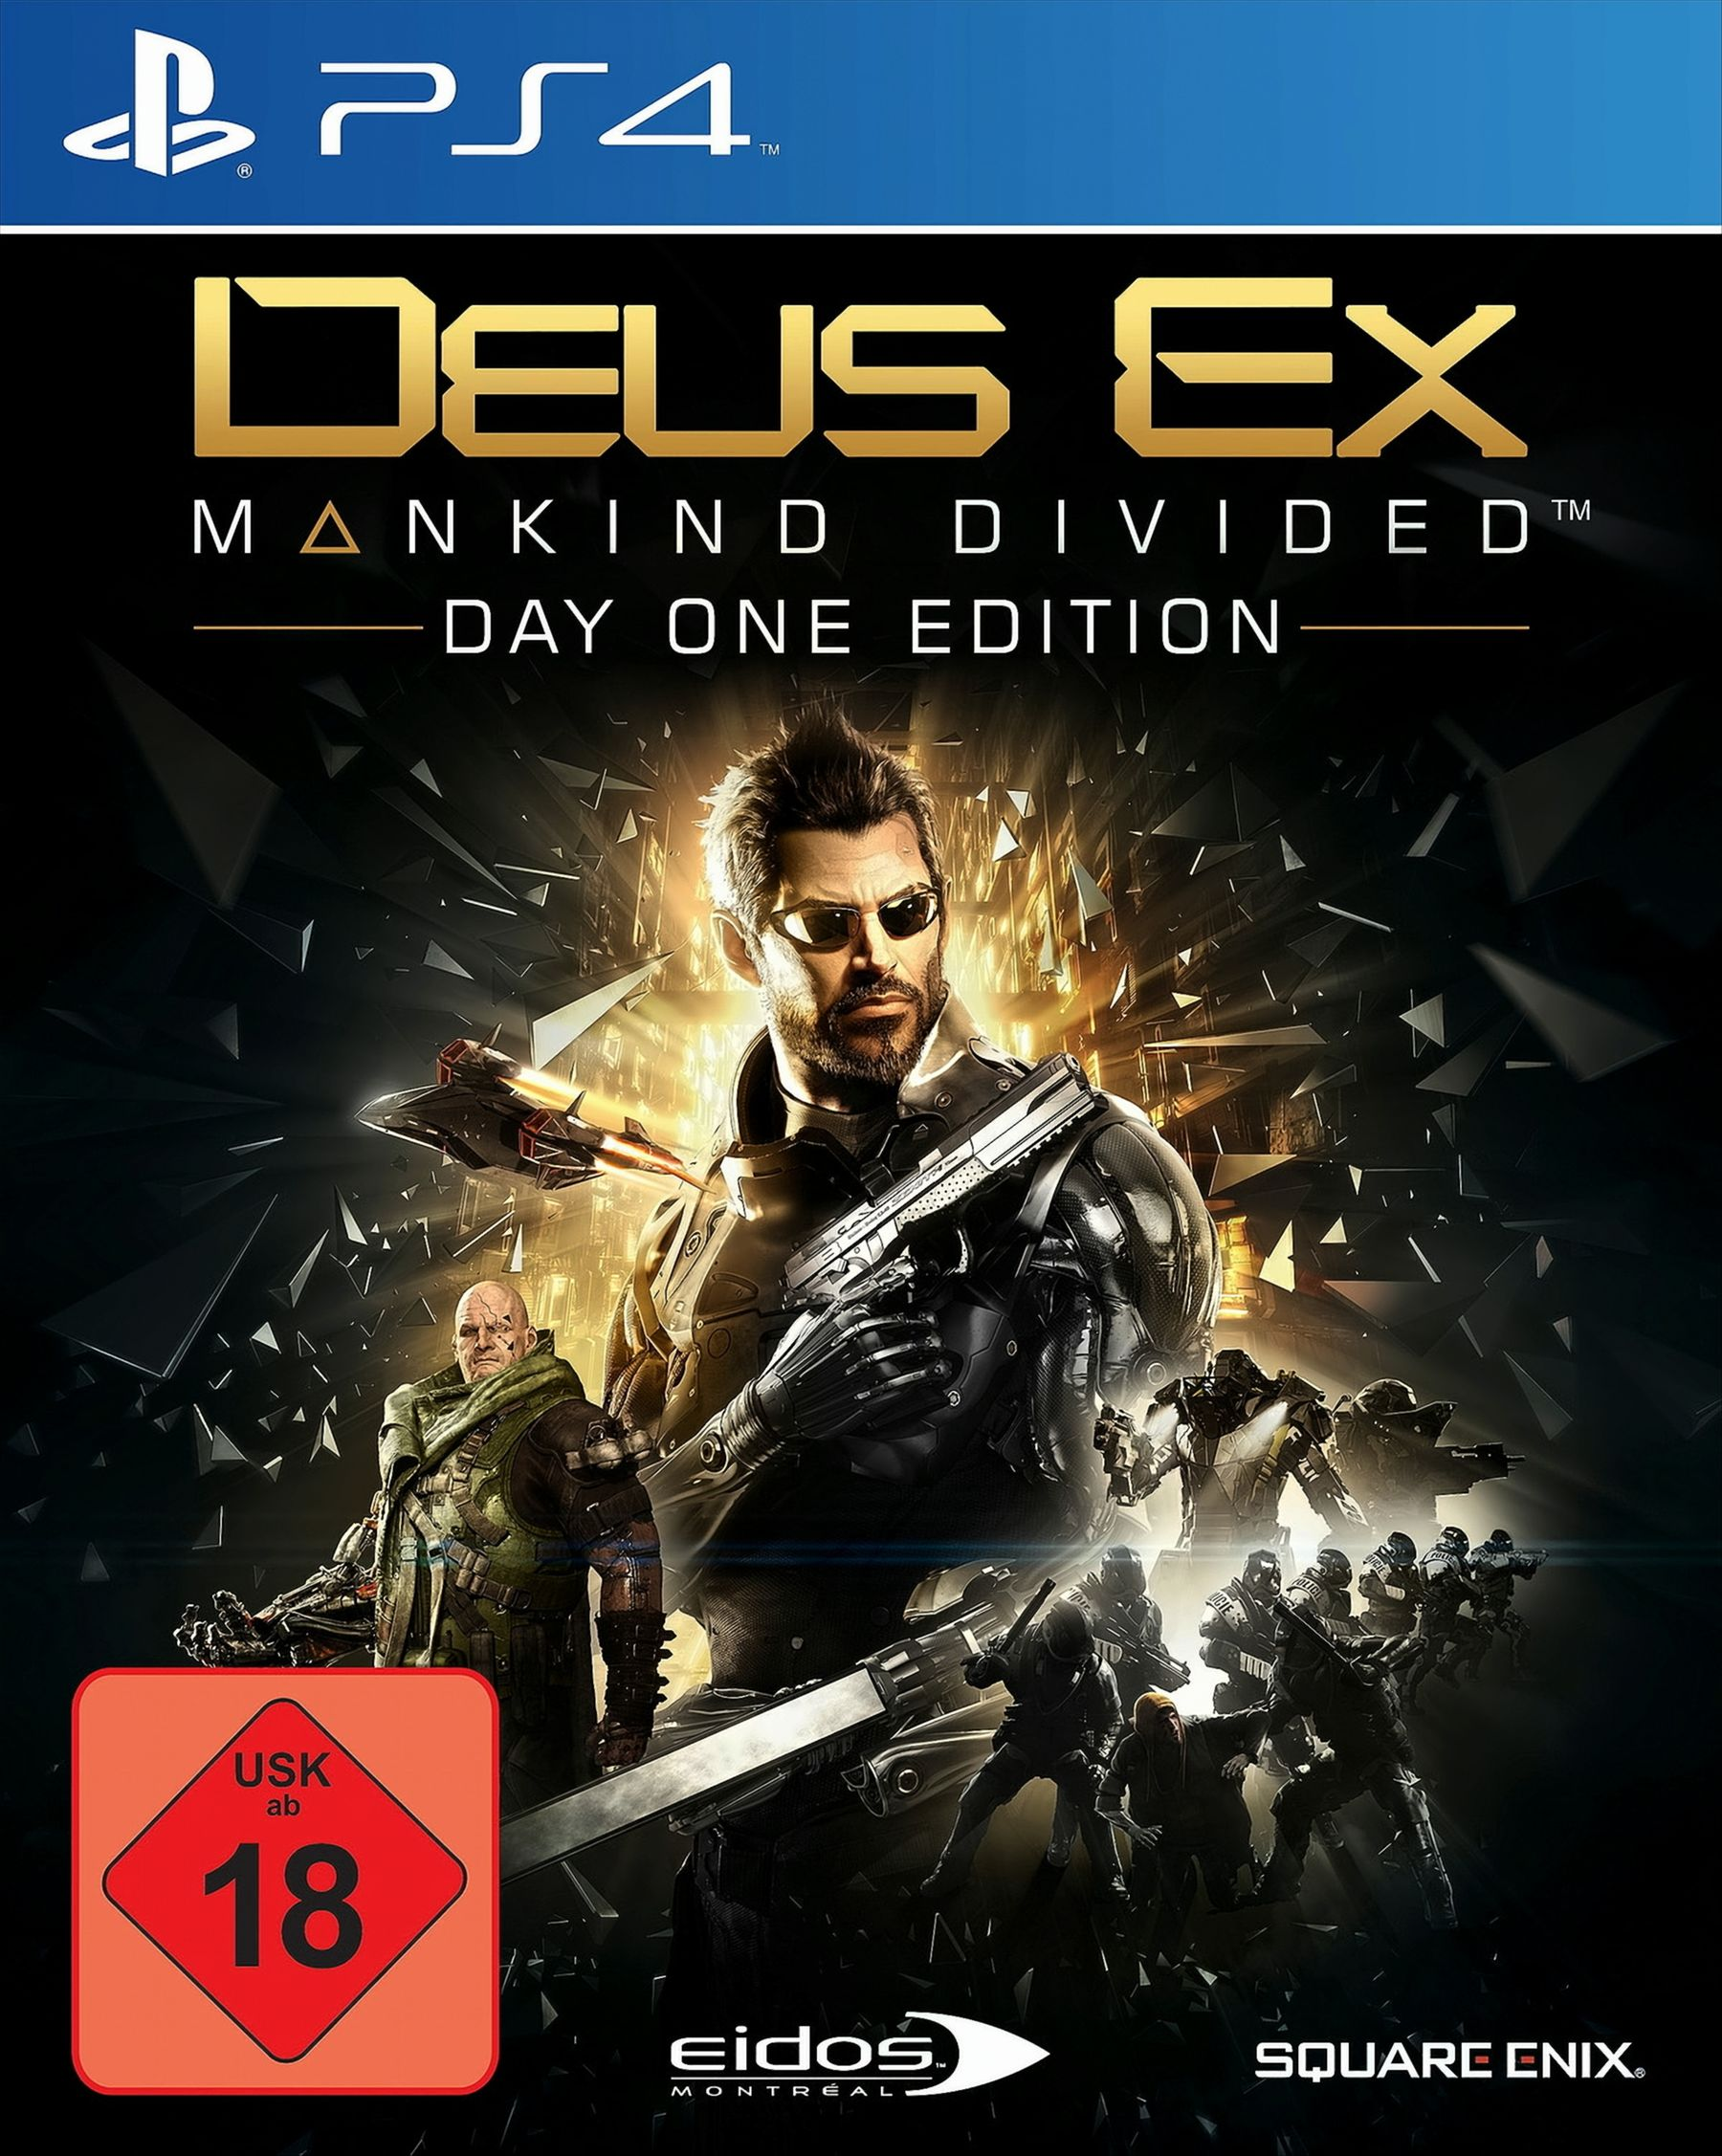 - Divided Ex: [PlayStation Mankind 4] Day Deus One Edition -